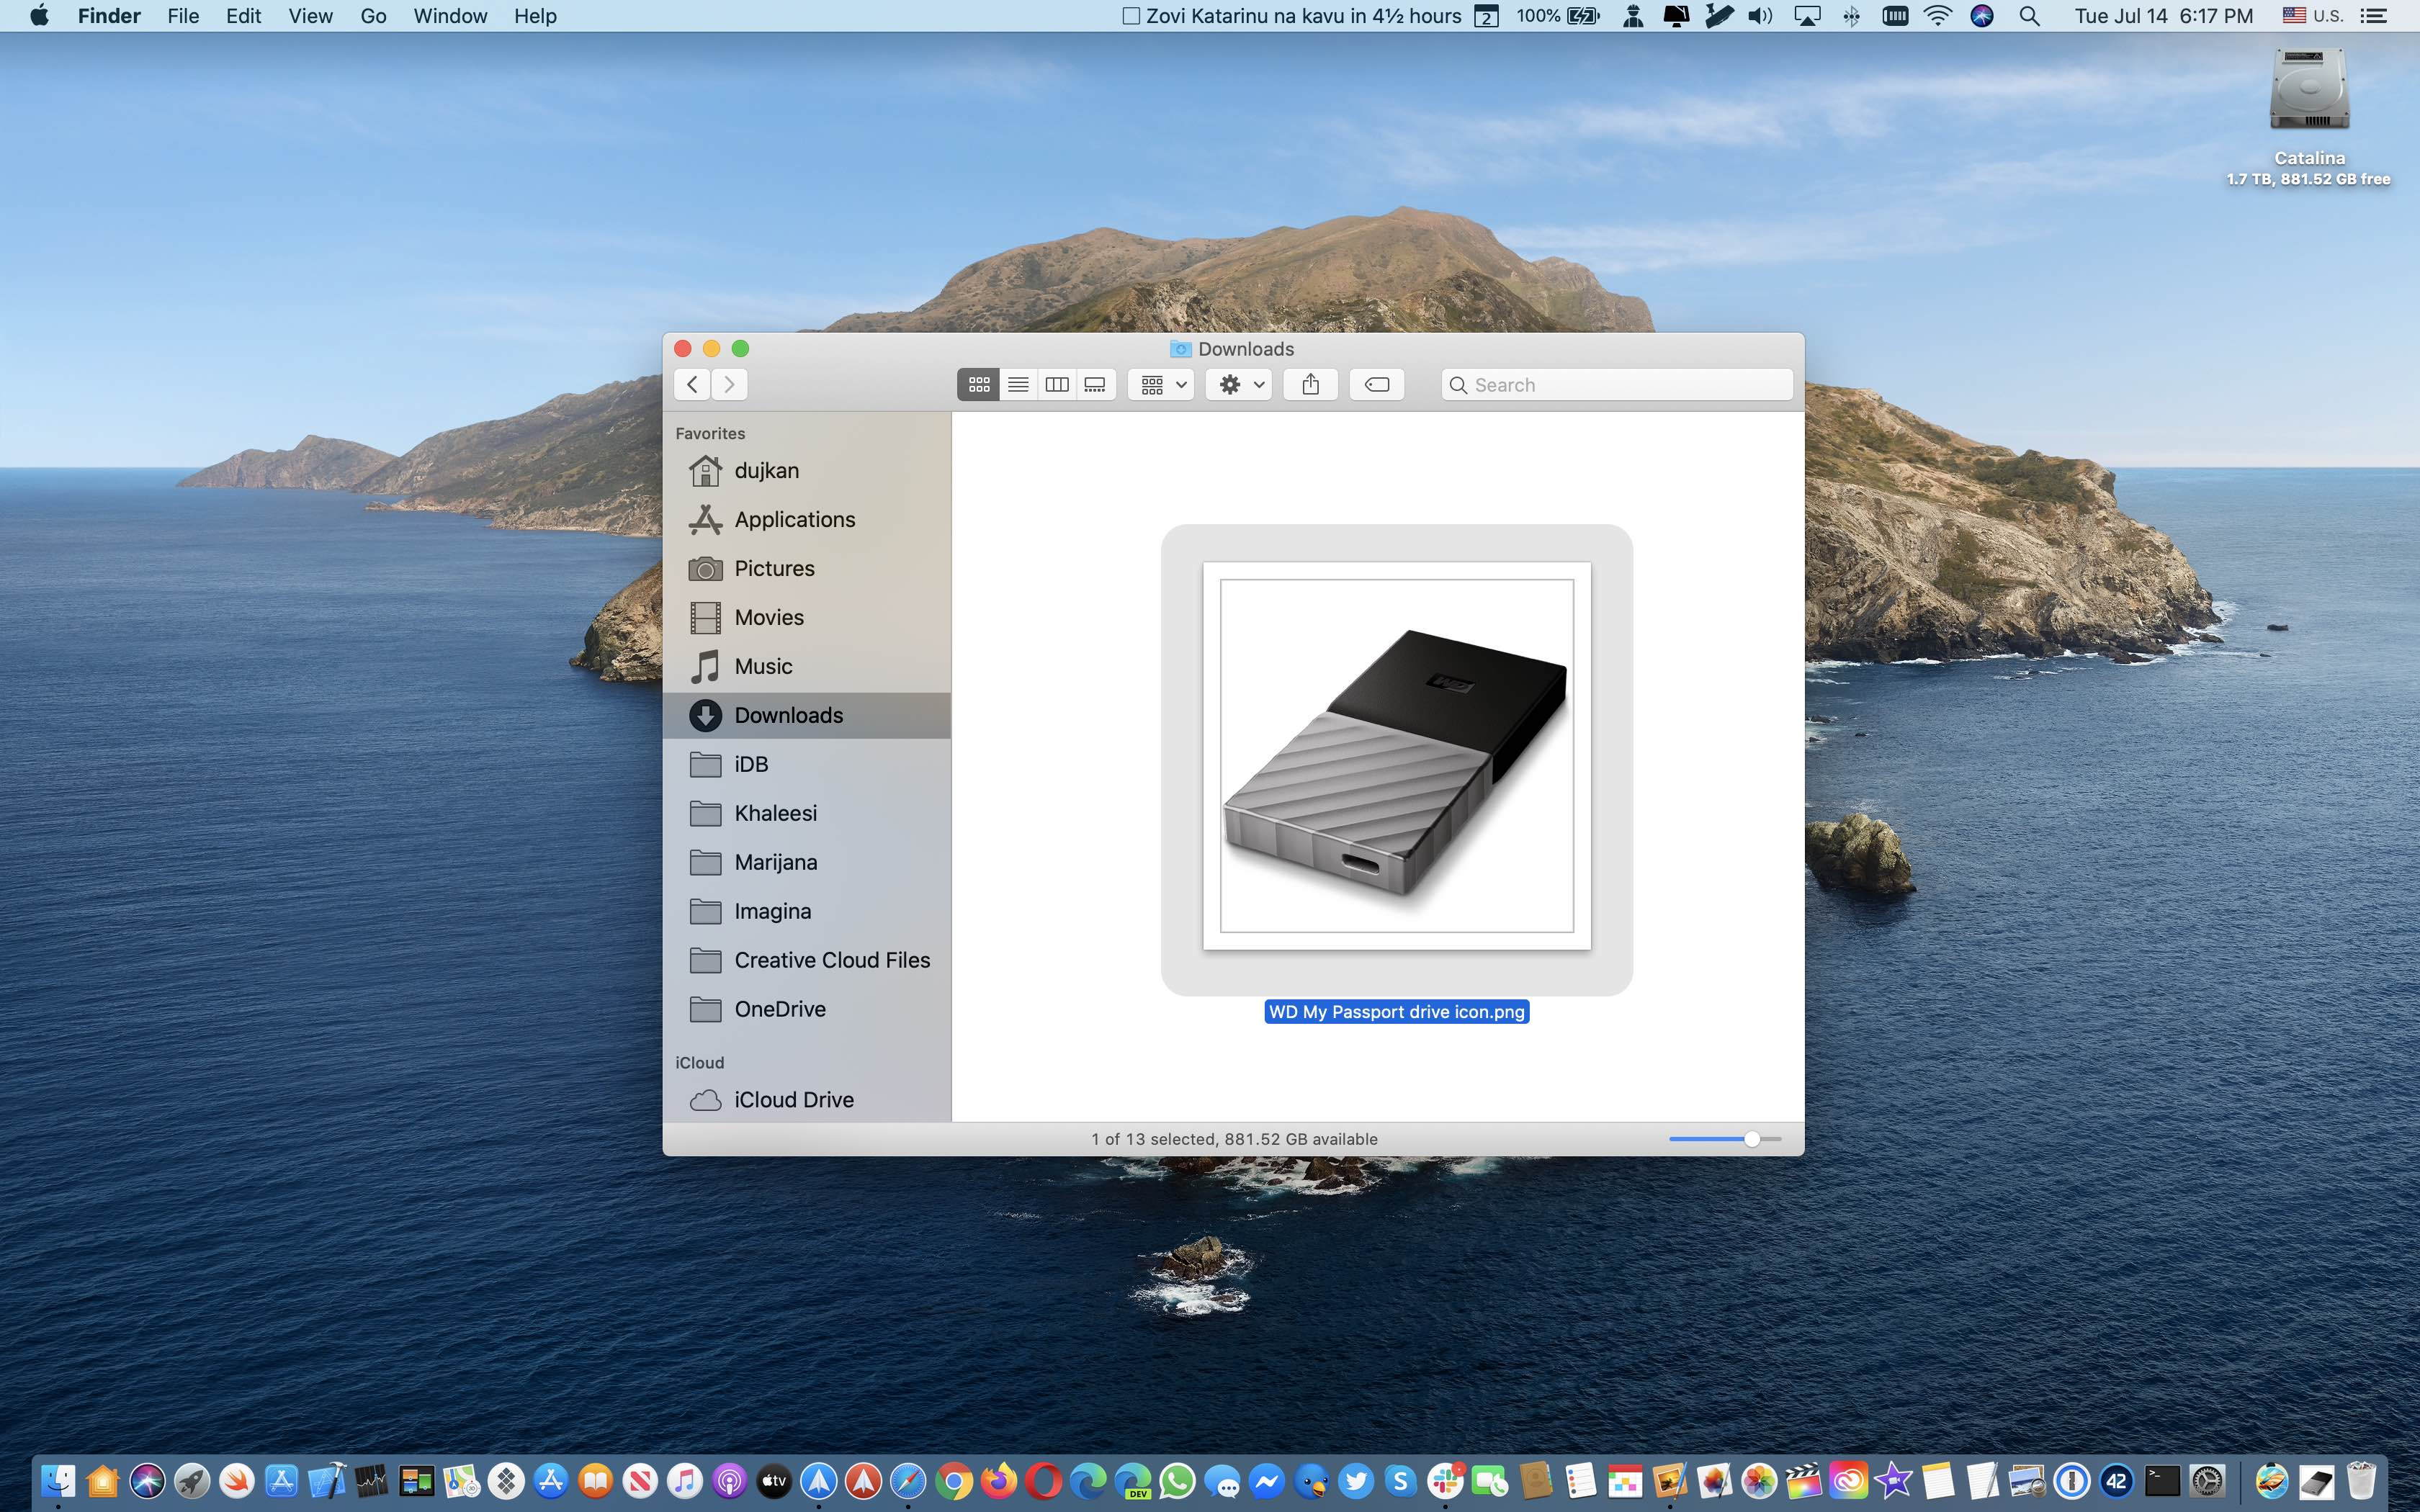 customize Mac drive icons tutorial - find image online and save it to your Mac